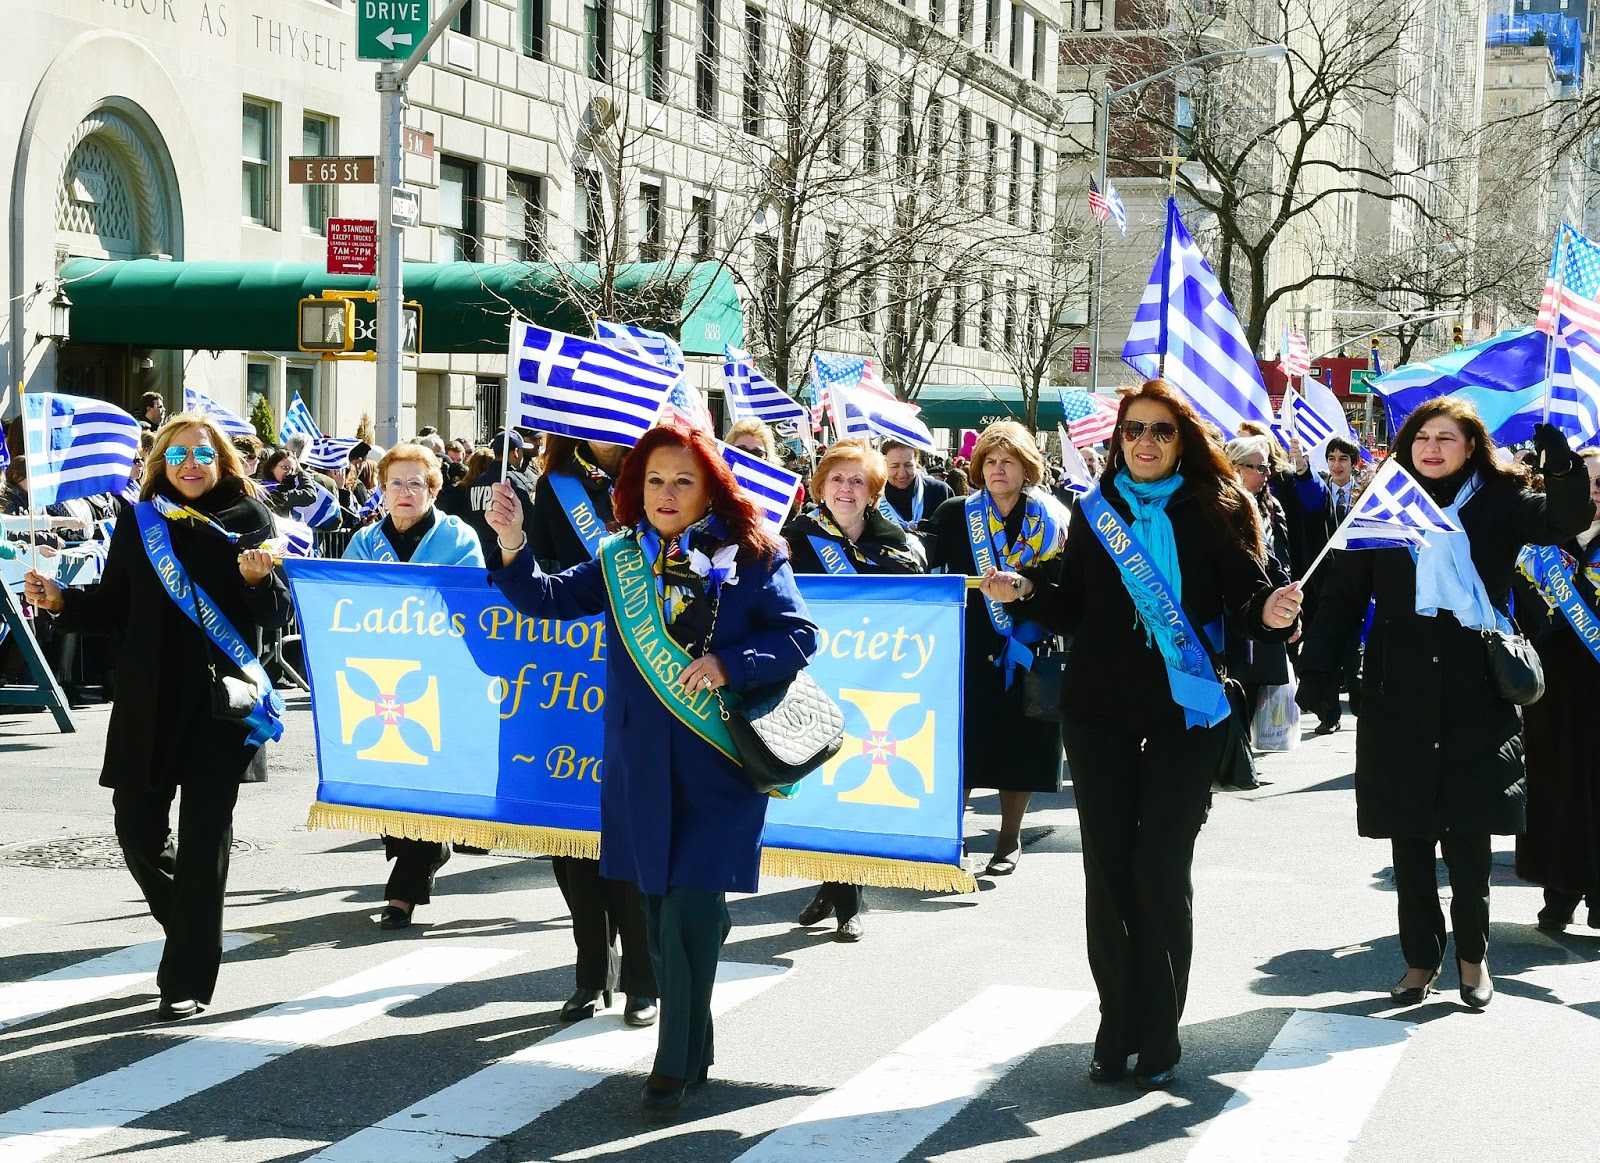 Greek Parade On Fifth, NYC